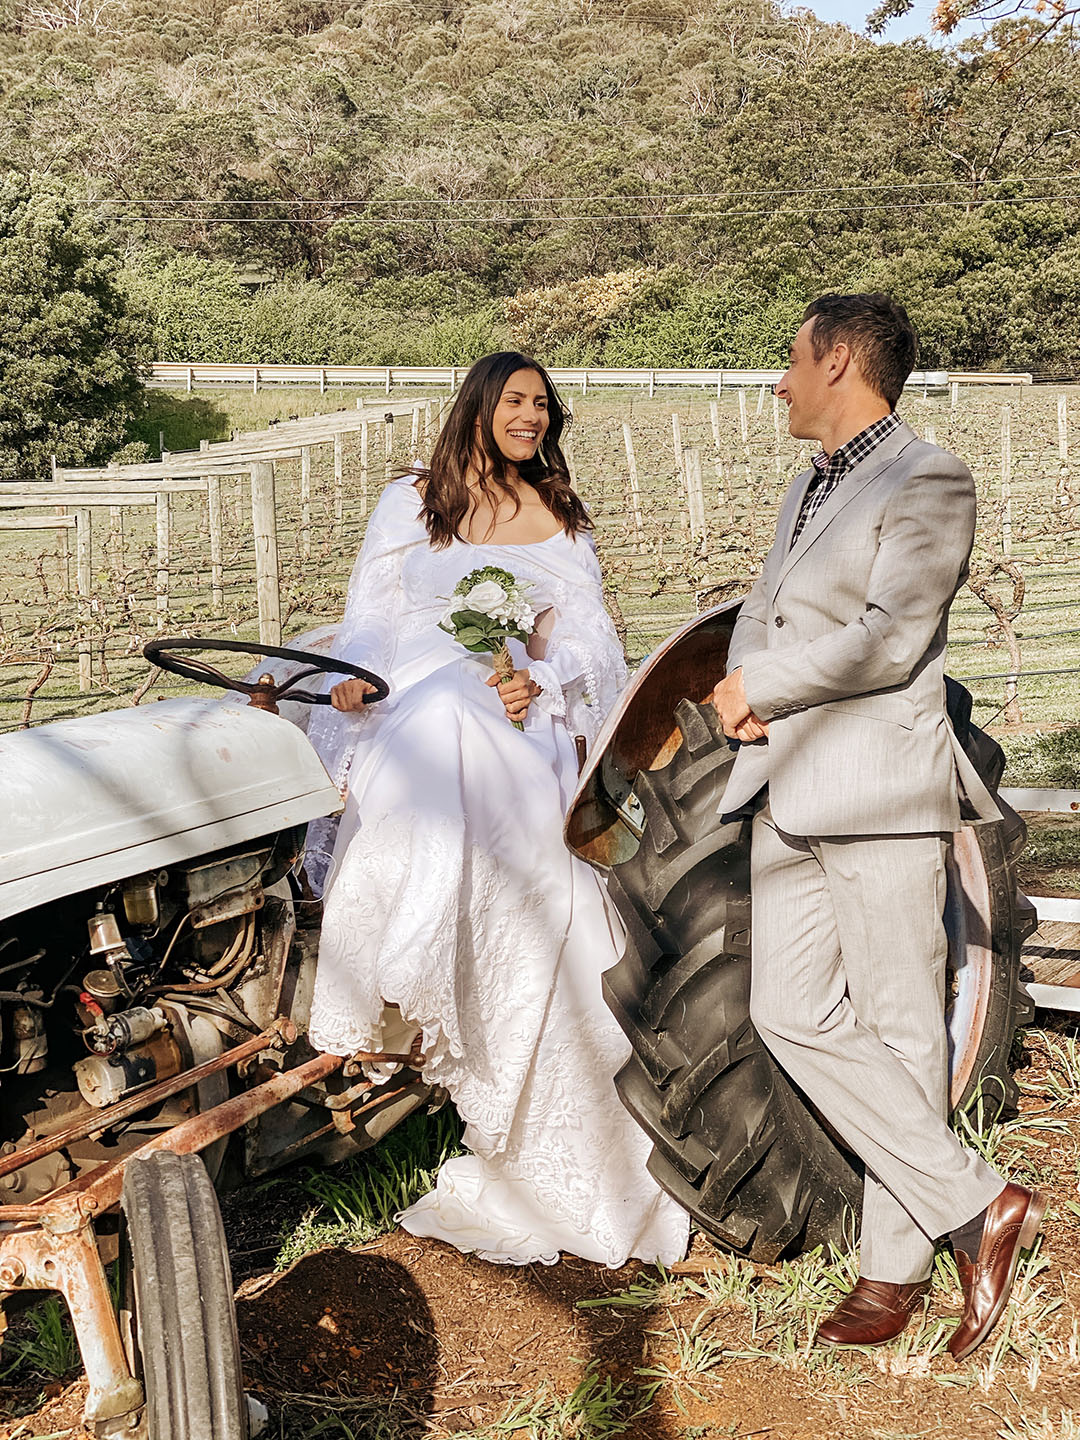 Happy couple on their wedding day in the vineyard with tractor